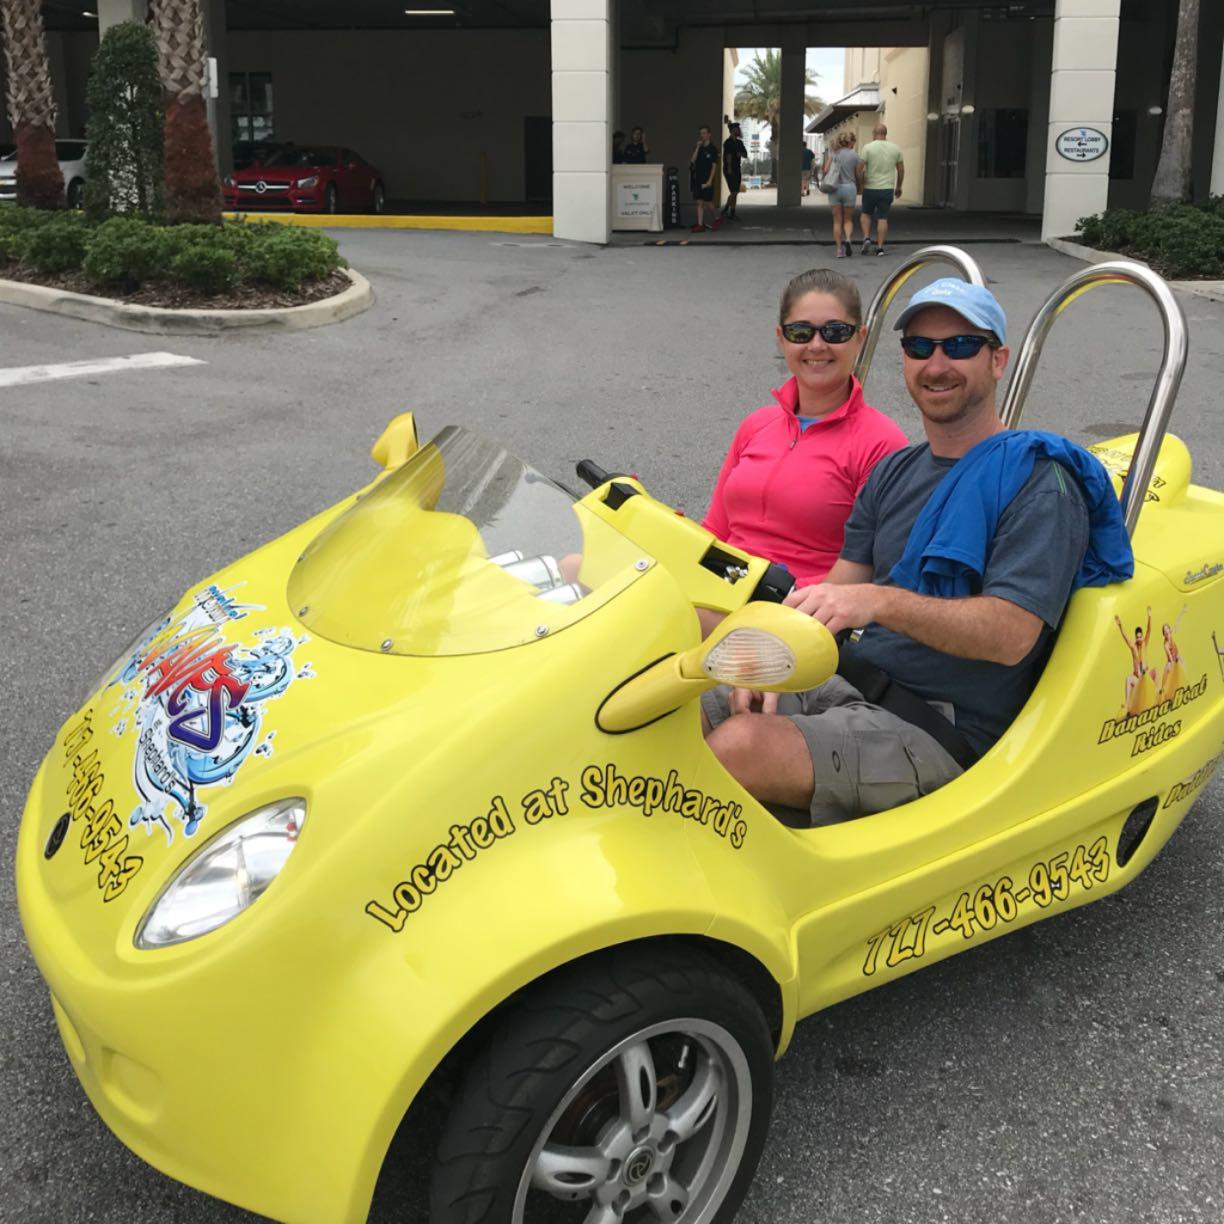 Let’s Ride !! Clearwater Beach Scooter and Bike Rentals Clearwater (727)466-9543